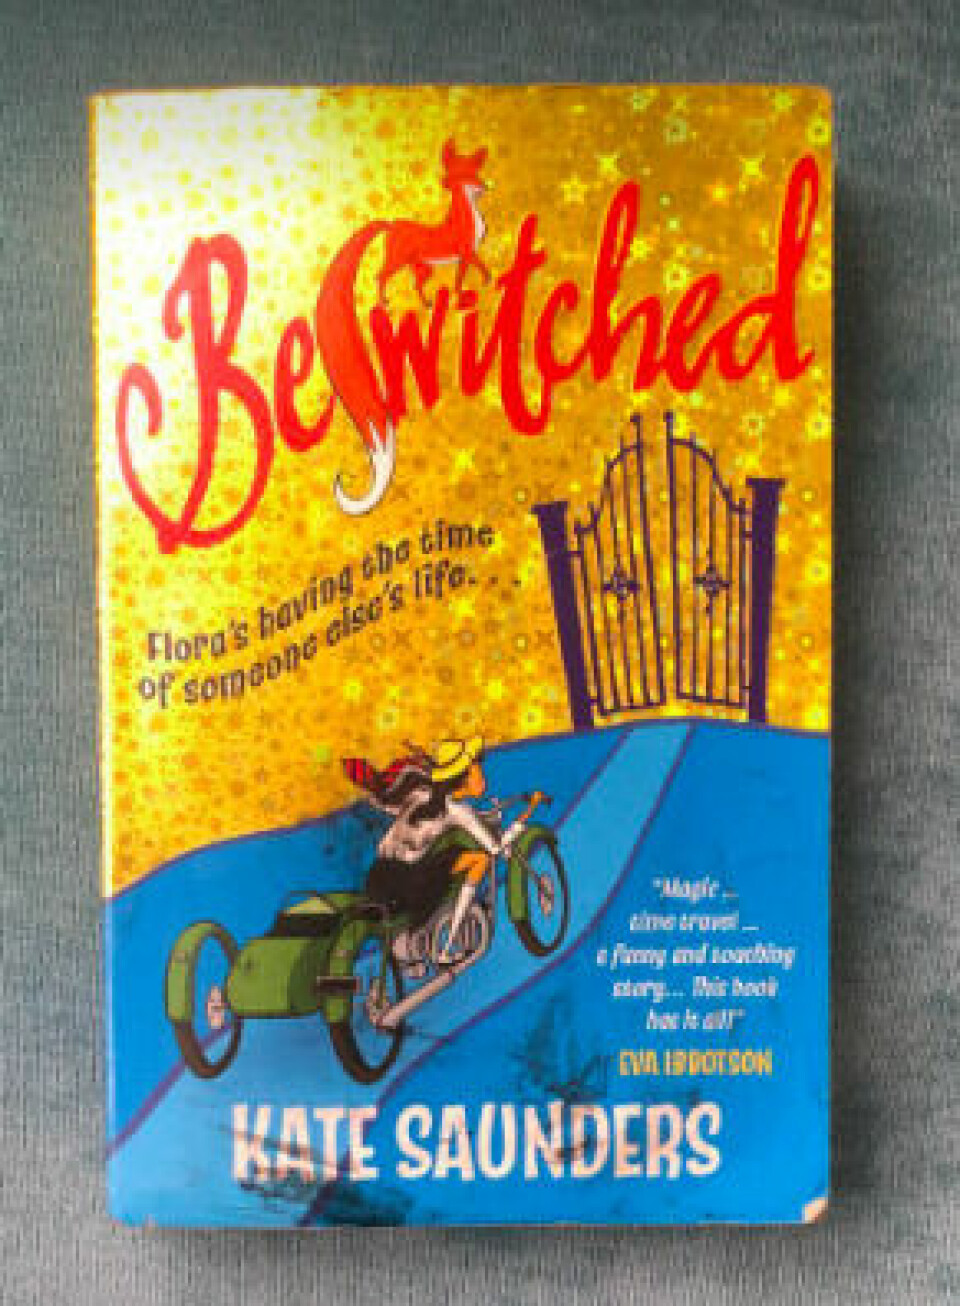 Beswitched by Kate Saunders.